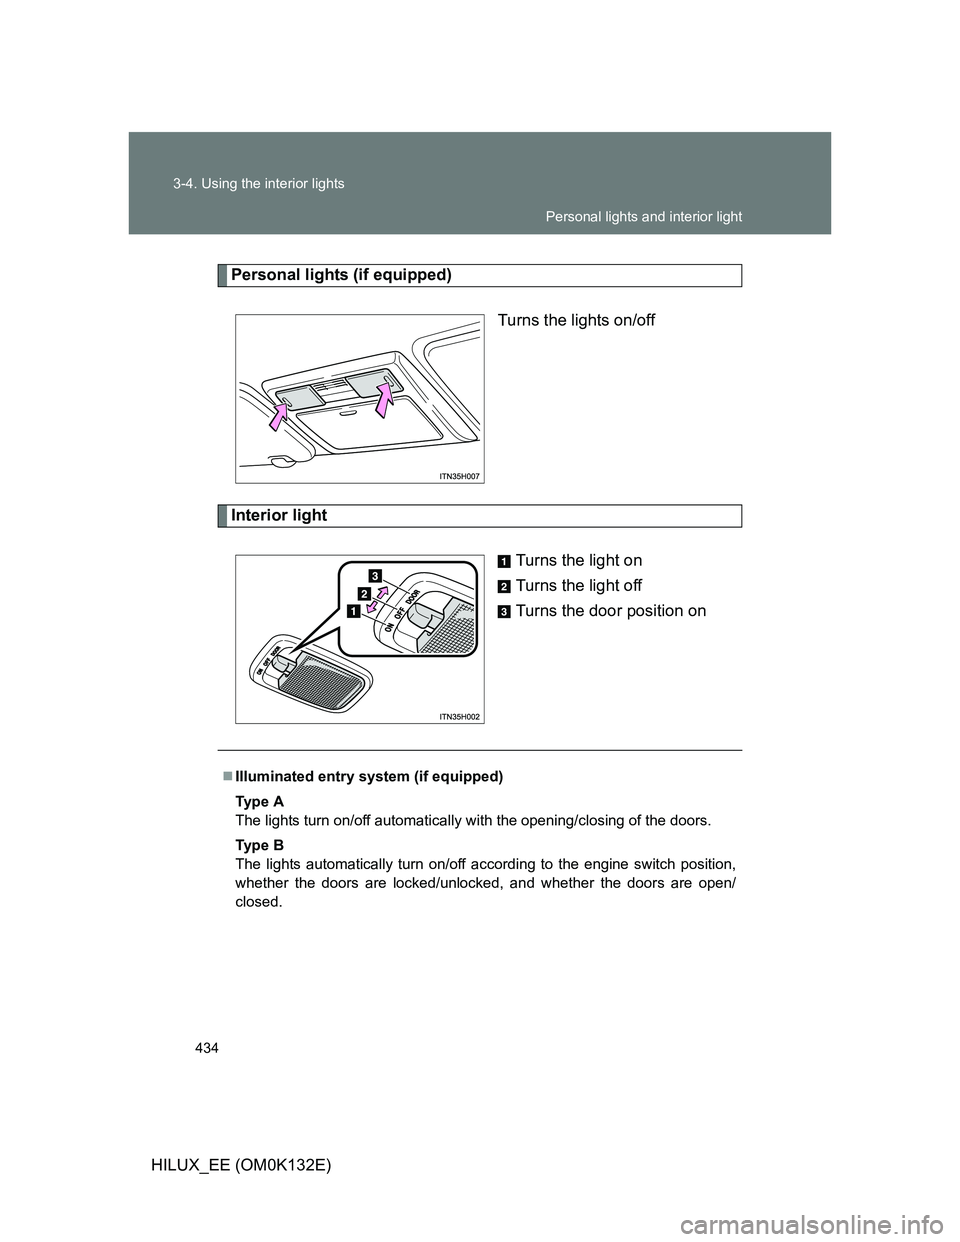 TOYOTA HILUX 2012  Owners Manual (in English) 434 3-4. Using the interior lights
HILUX_EE (OM0K132E)
Personal lights (if equipped)
Turns the lights on/off
Interior light
Turns the light on
Turns the light off
Turns the door position on
Illumin